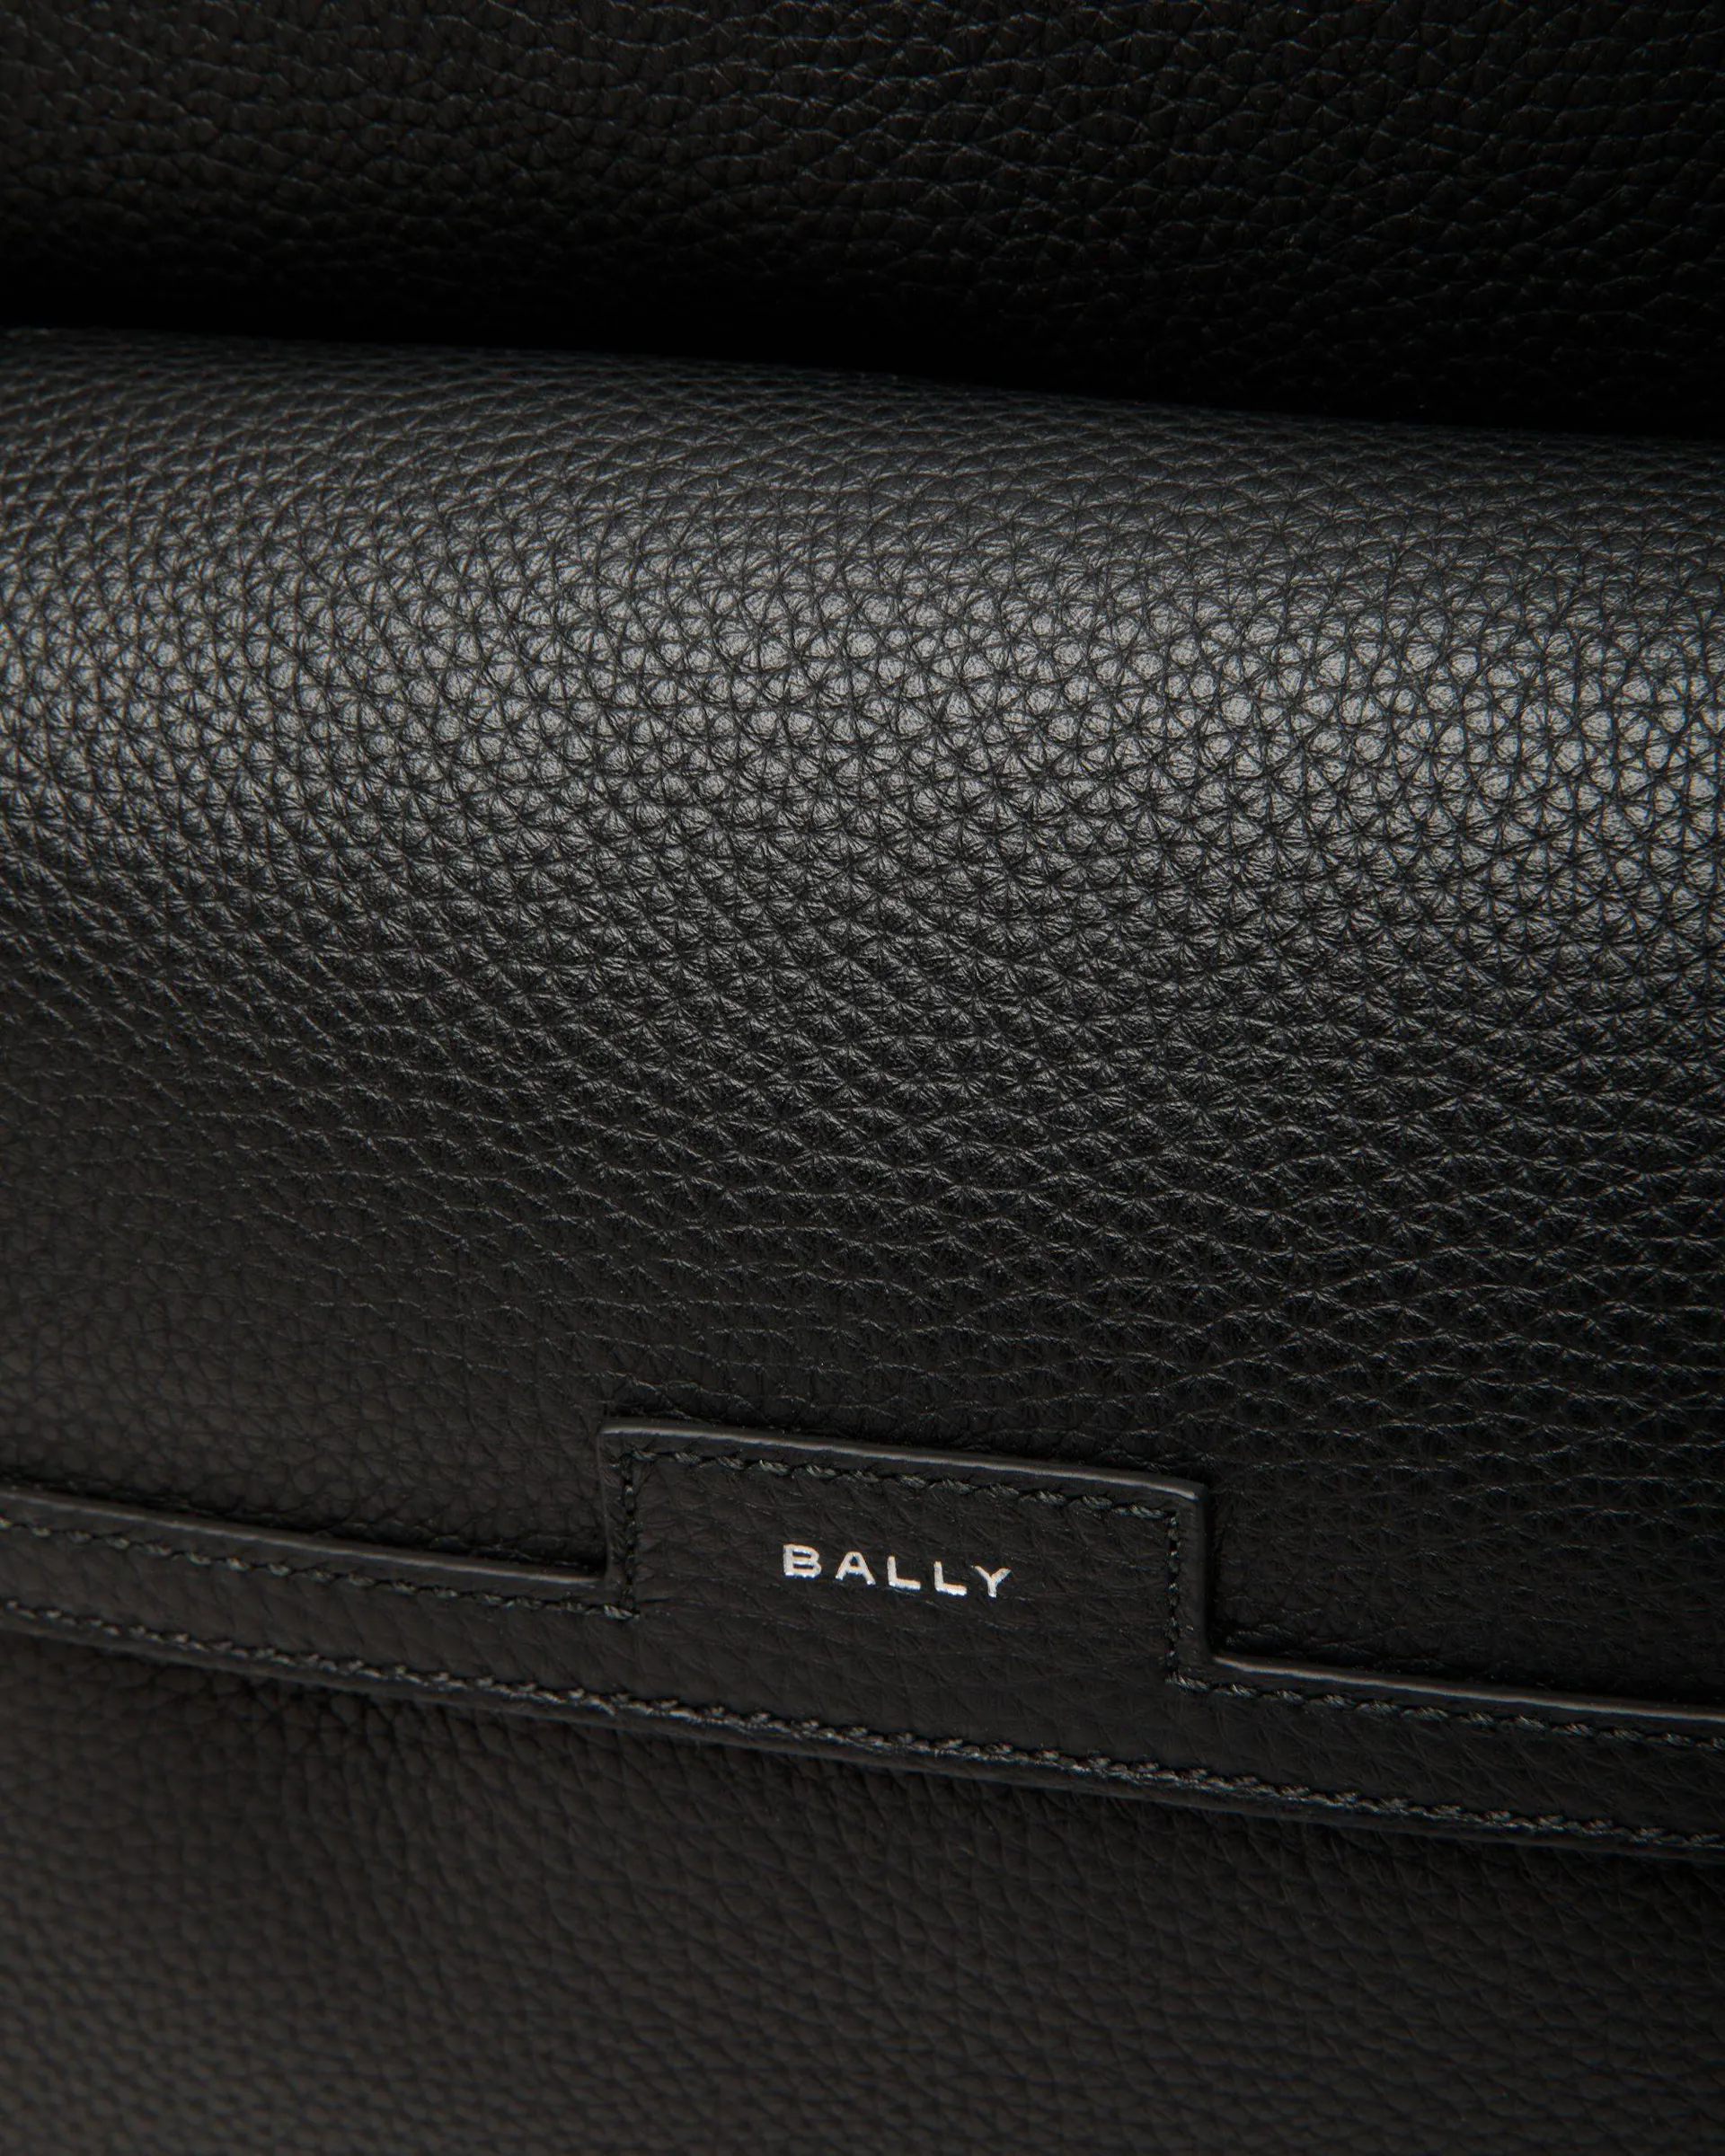 Men's Code Backpack in Black Grained Leather | Bally | Still Life Detail